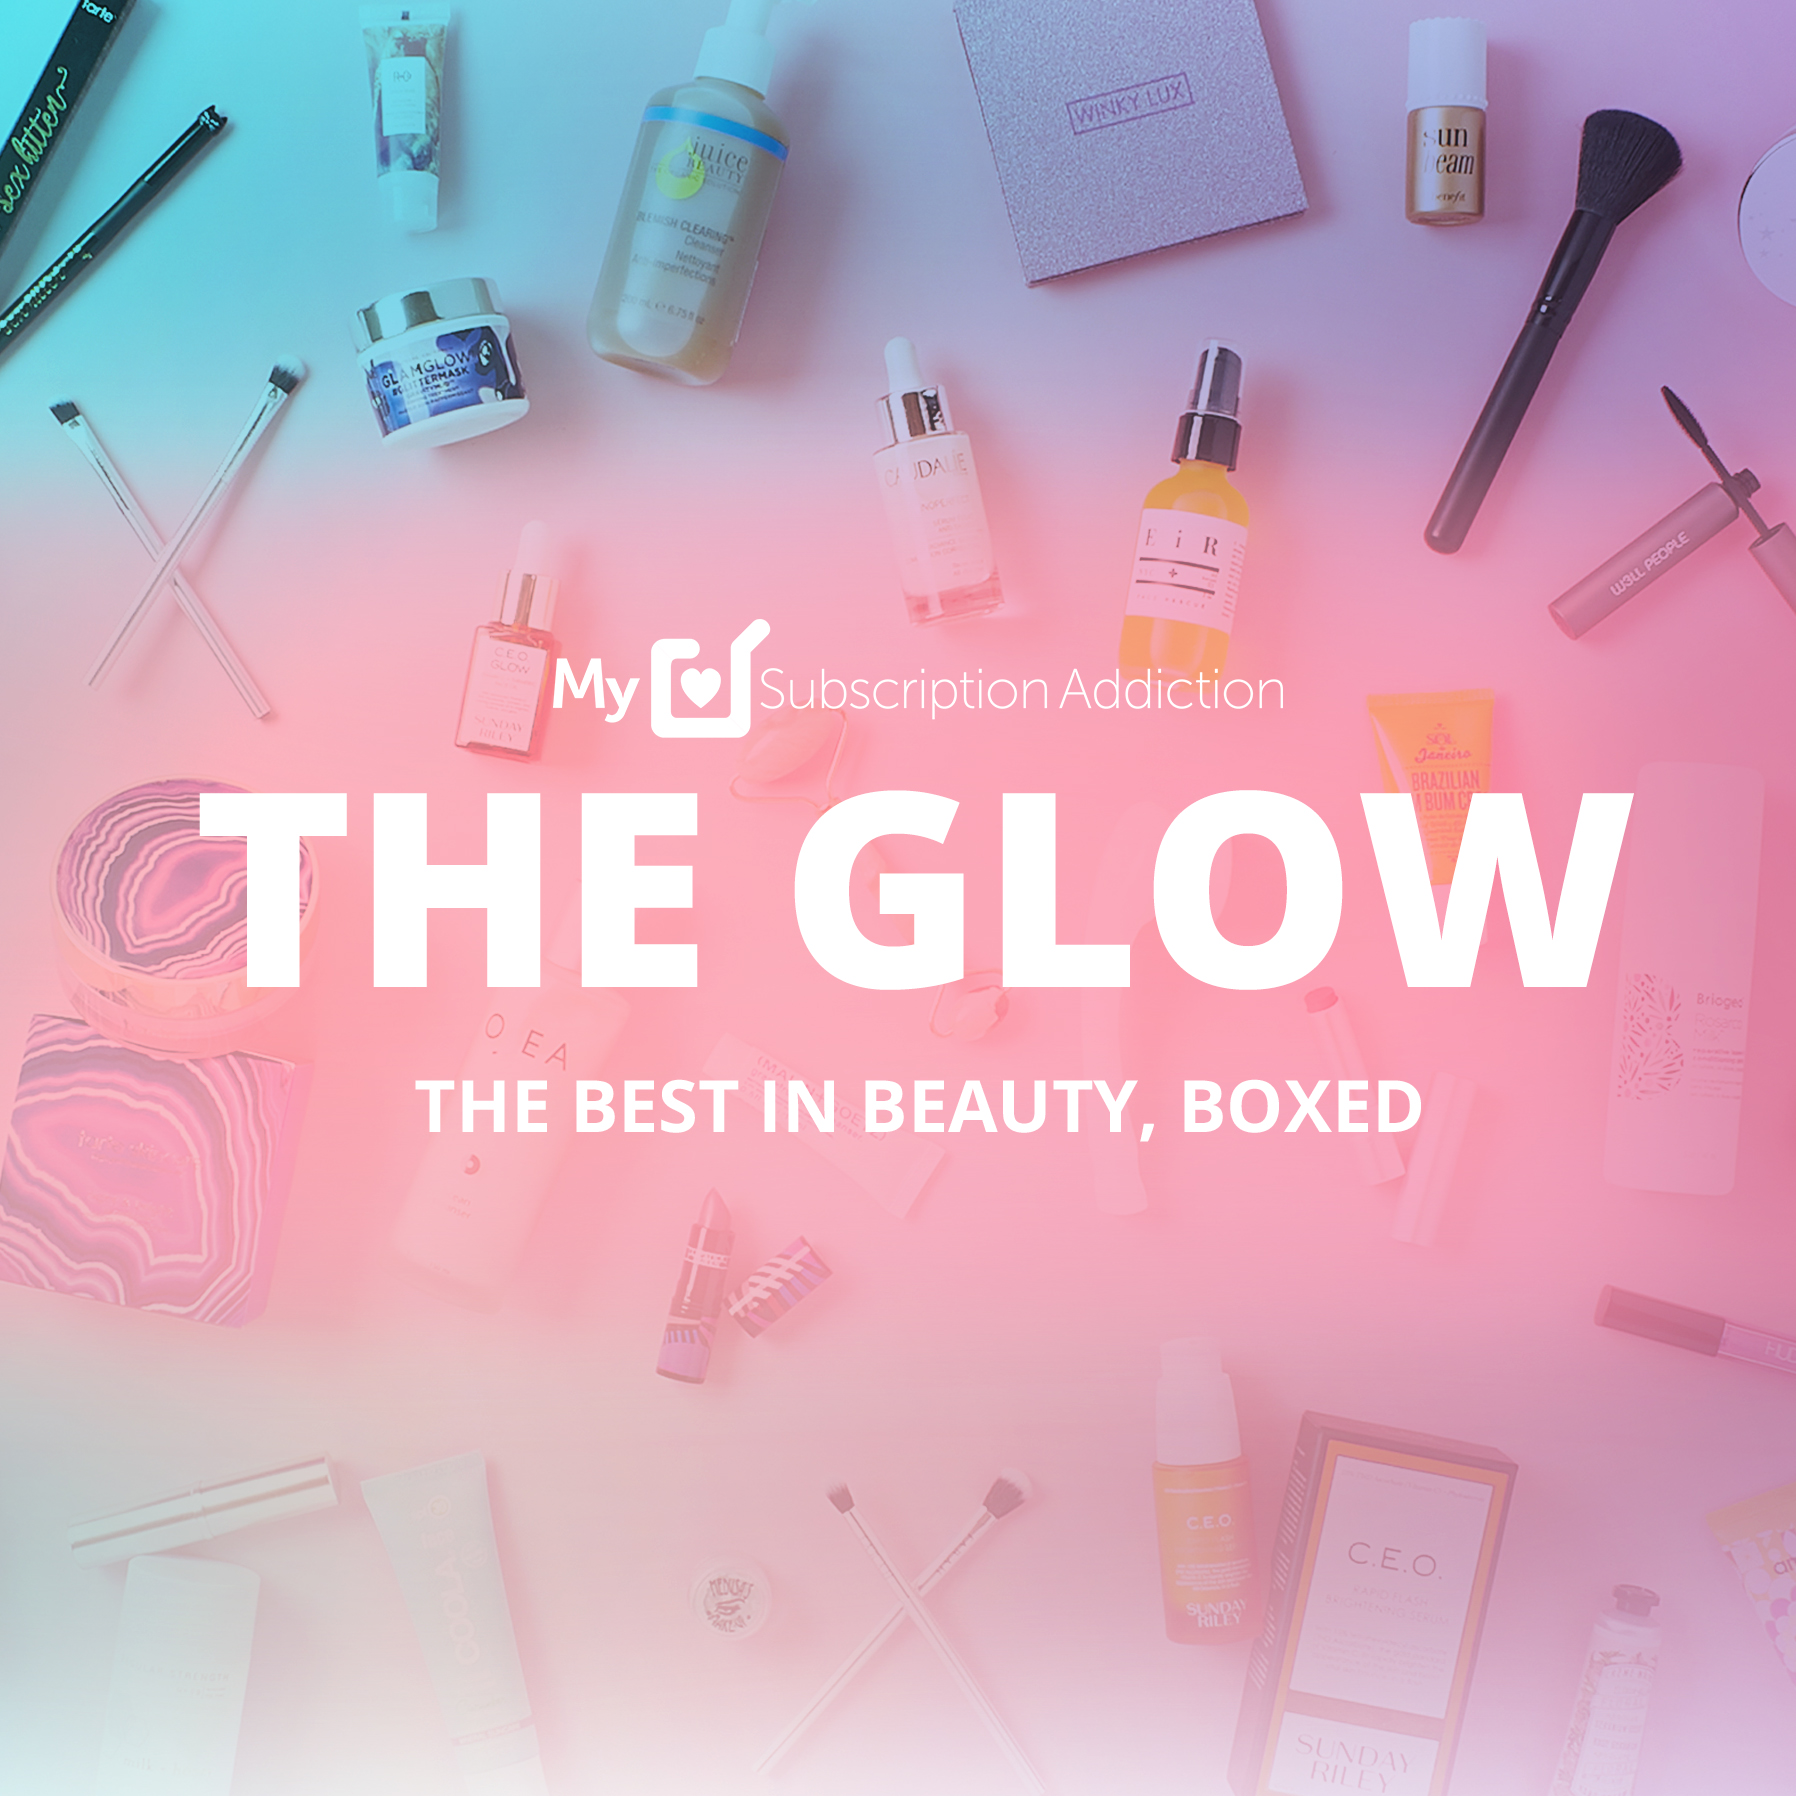 One Day Only: FREE Gift with Ipsy Subscription – Sign Up For The Glow To Access!